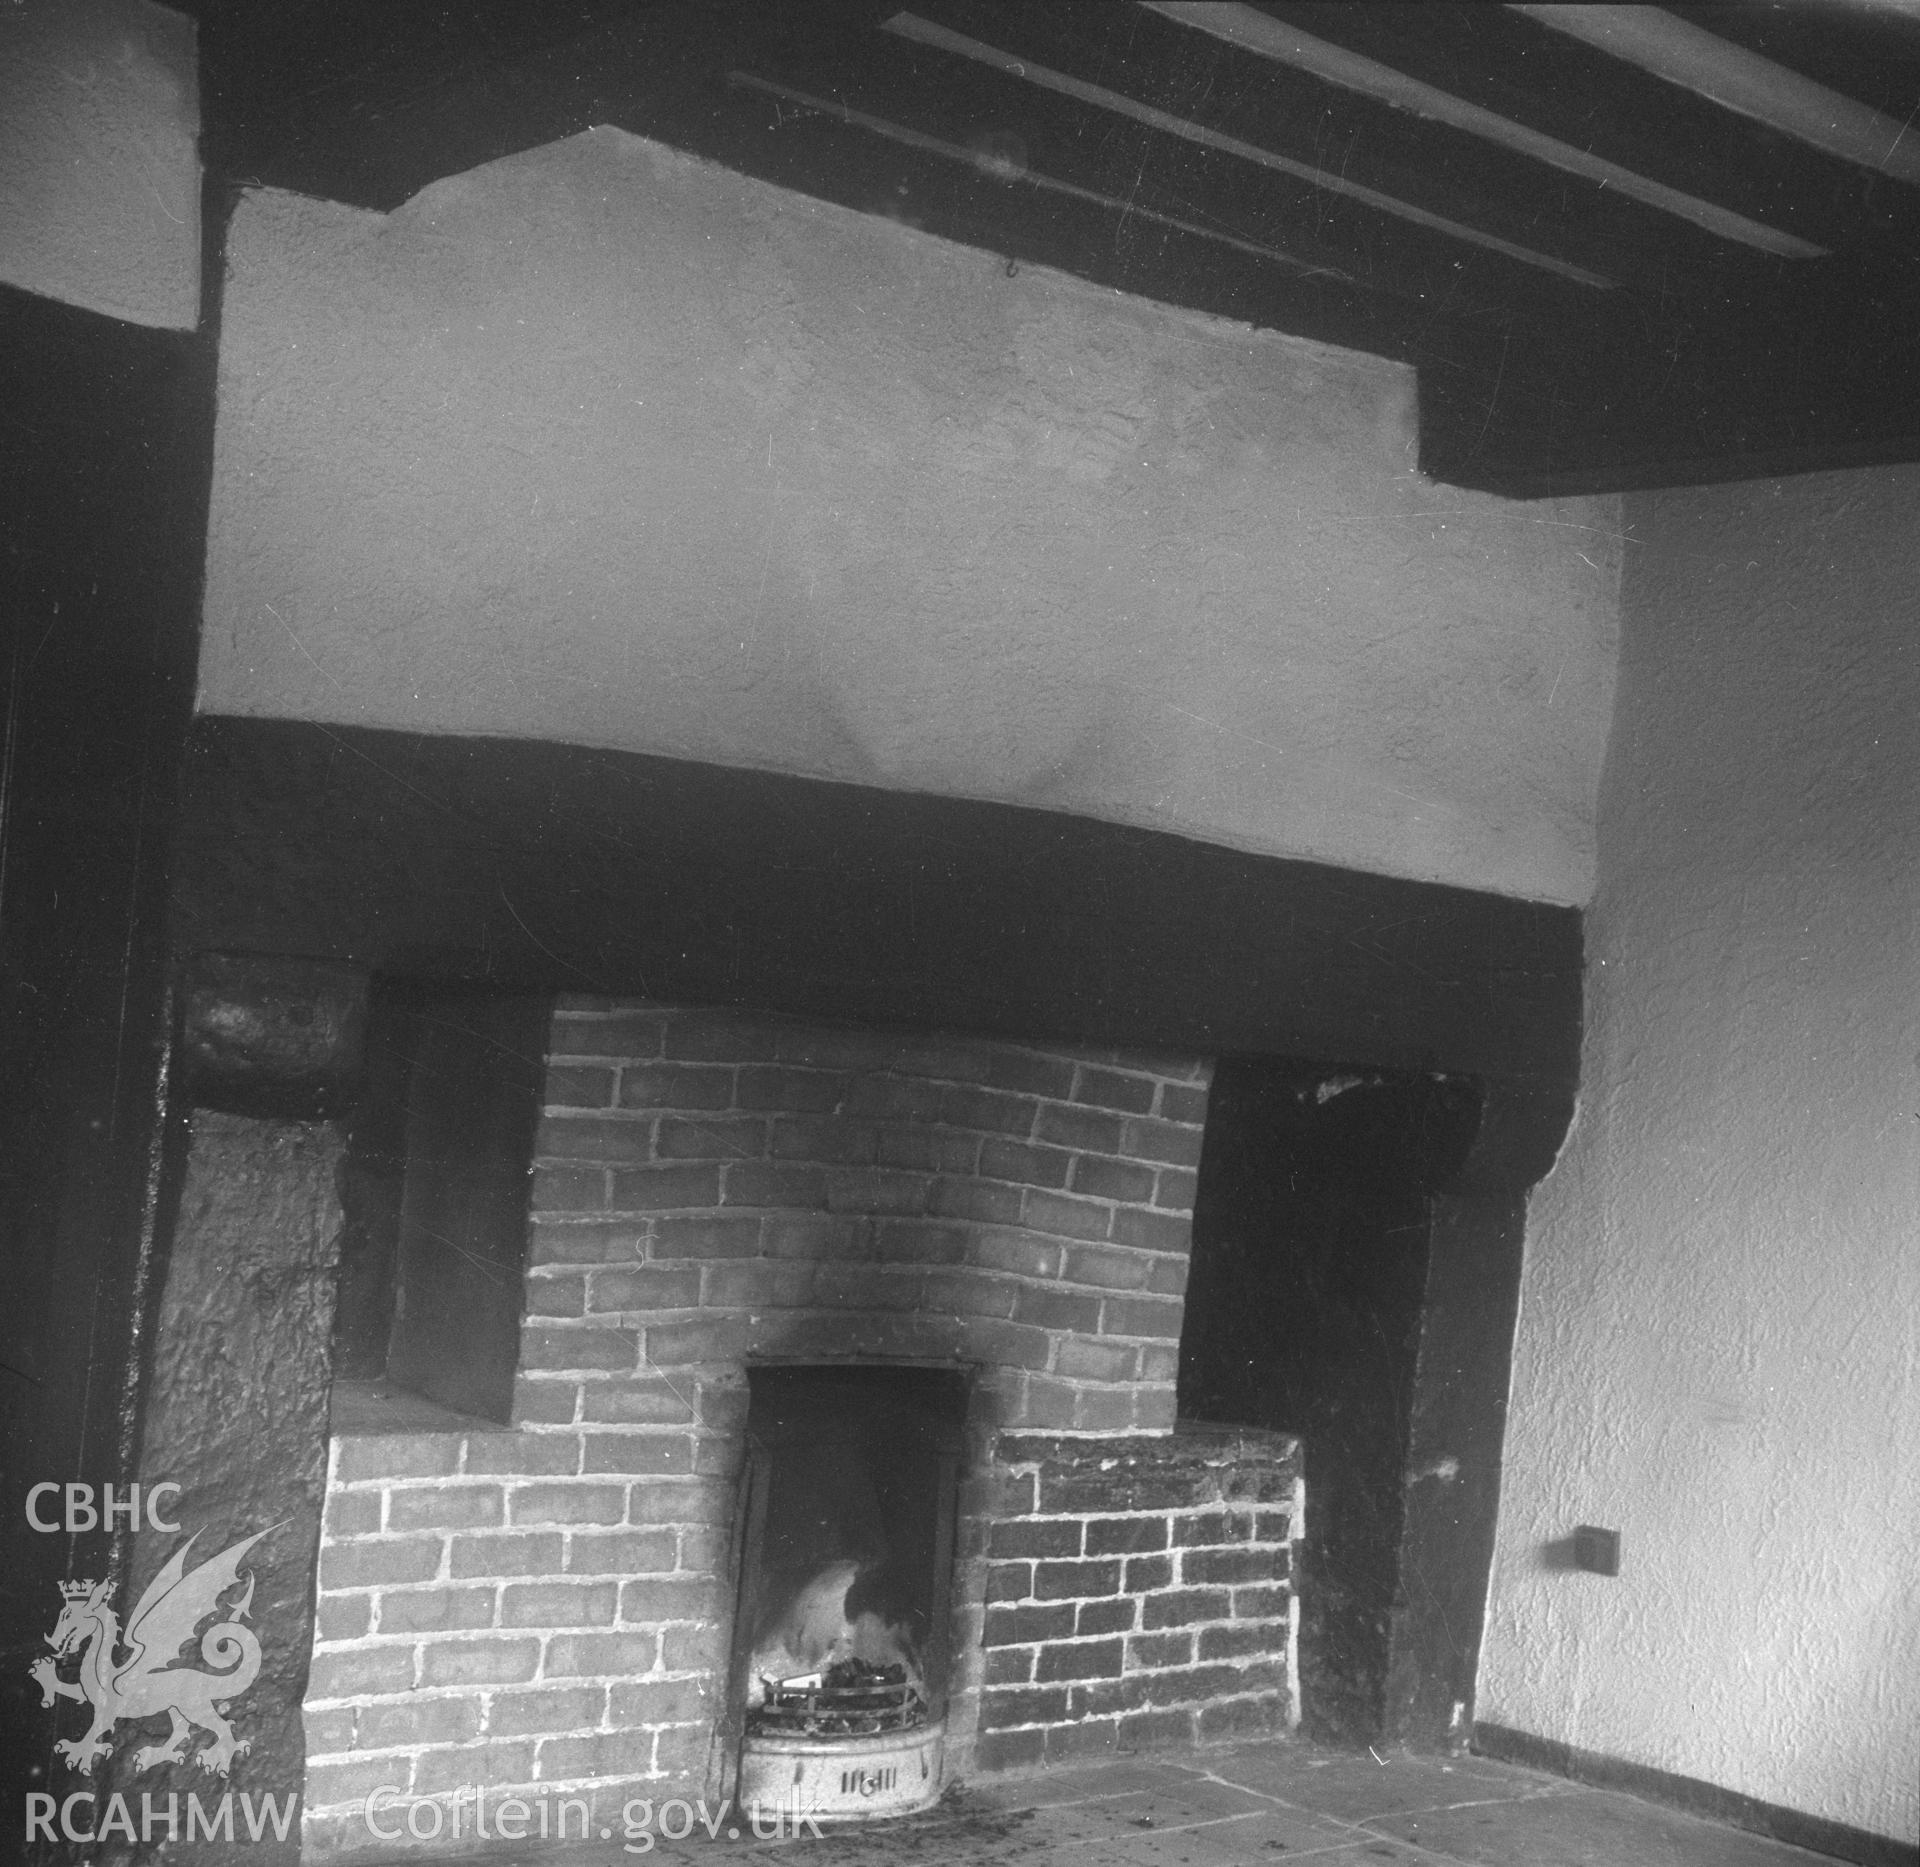 Black and white nitrate negative showing fireplace, Brithdir Mawr, Flintshire.